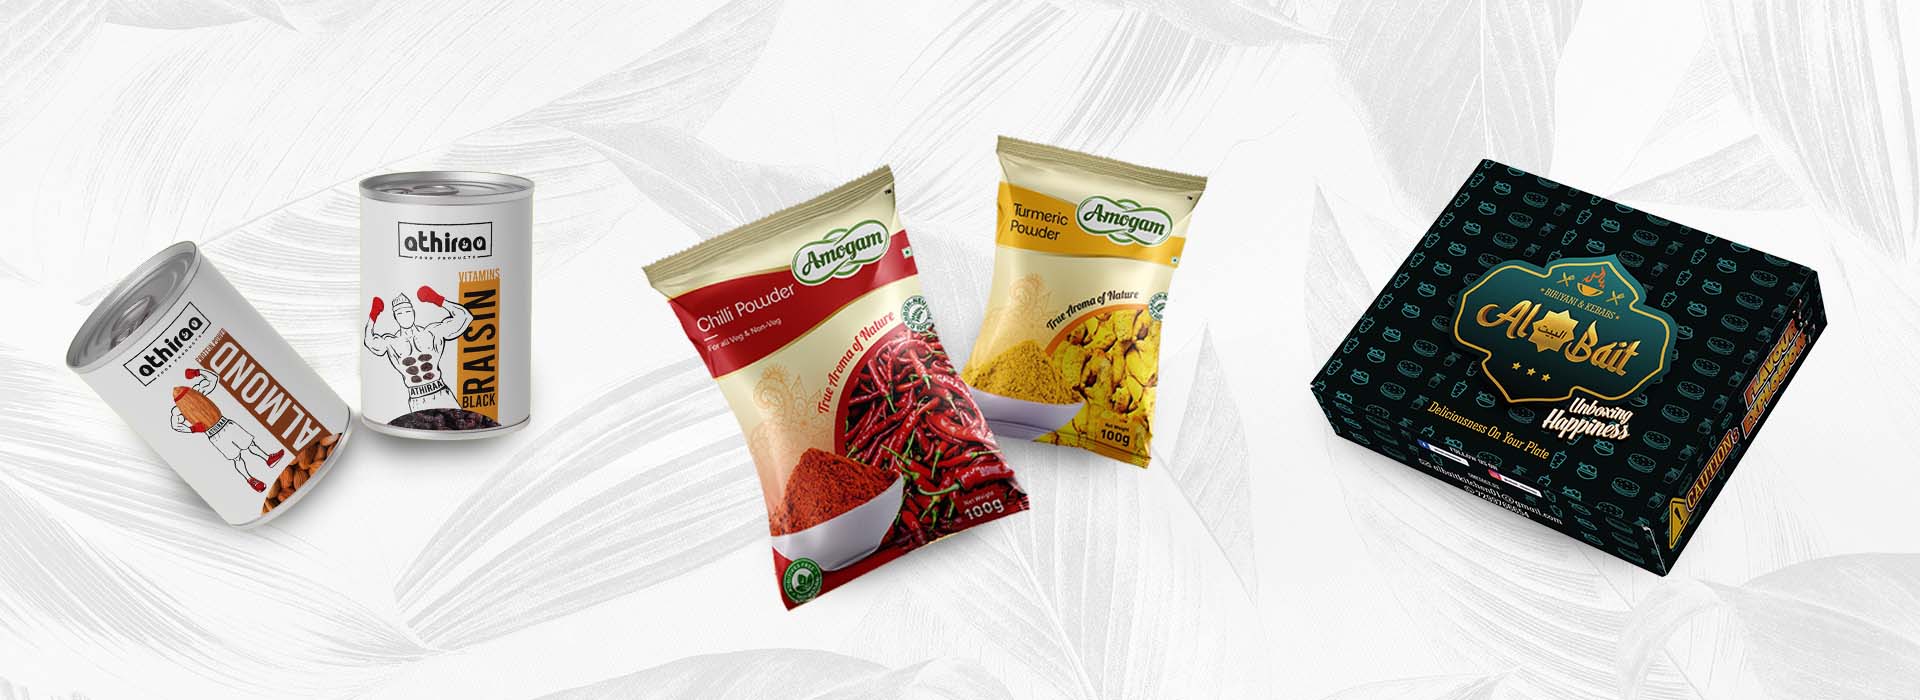 Food Product Packaging Design Services